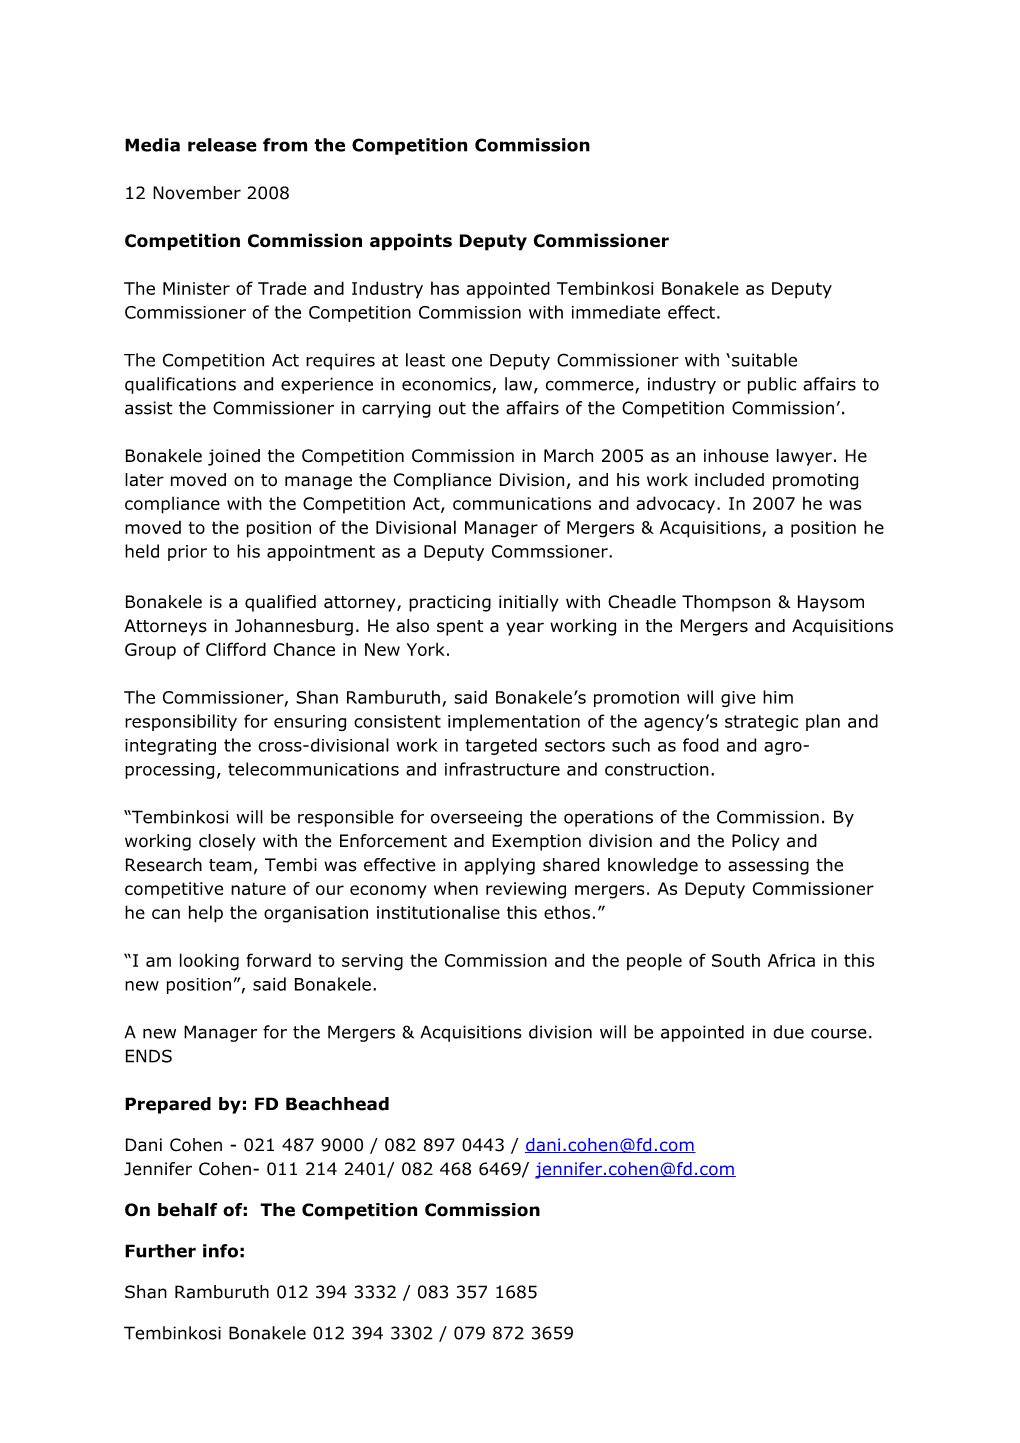 Media Release from the Competition Commission